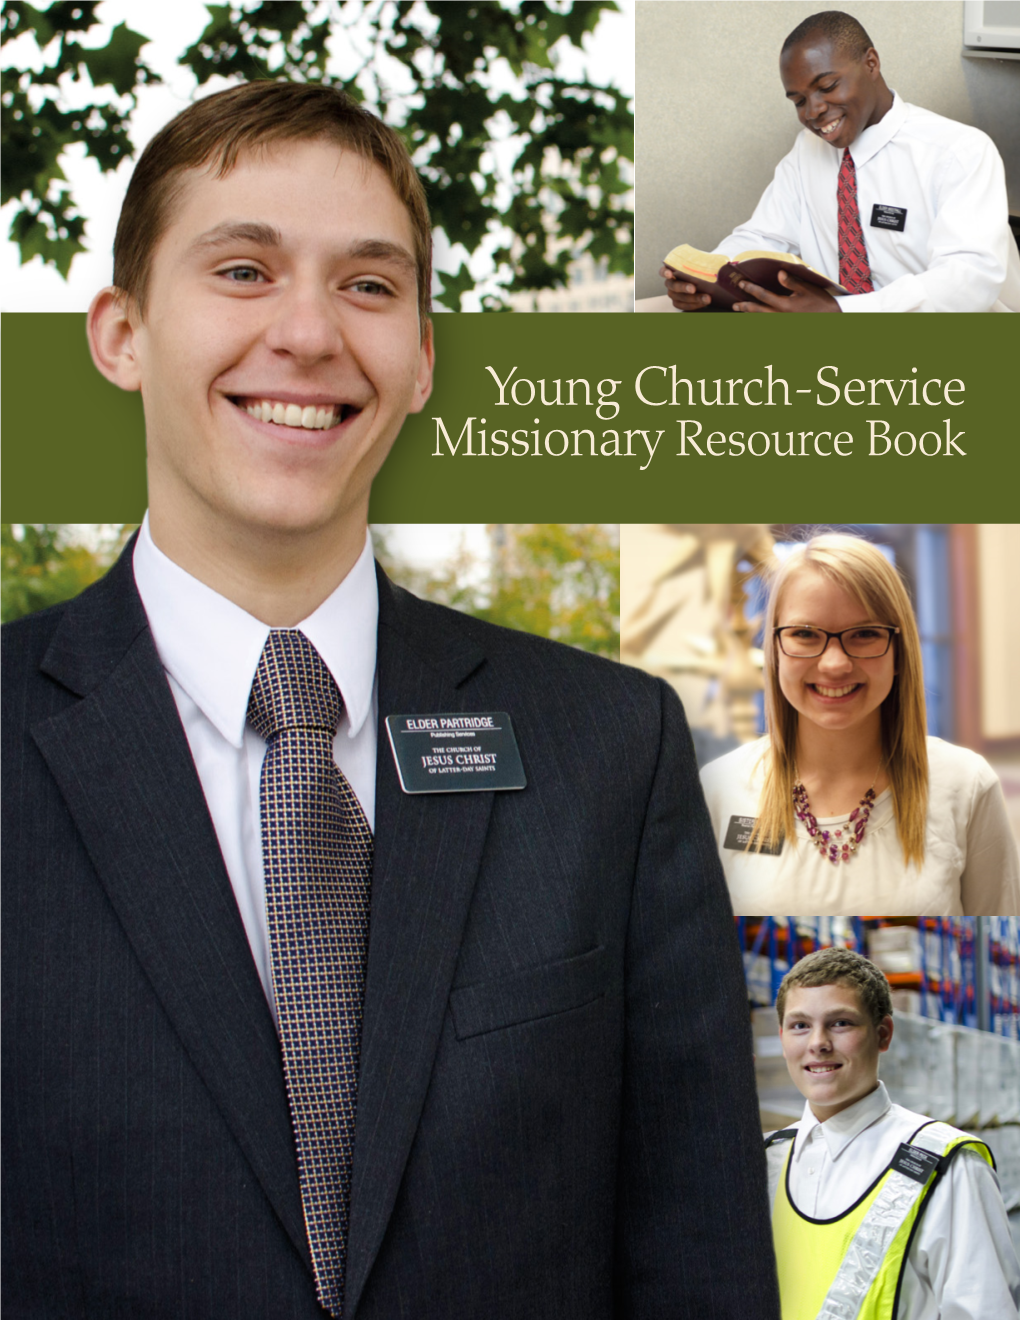 Young Church-Service Missionaries (Ycsms)